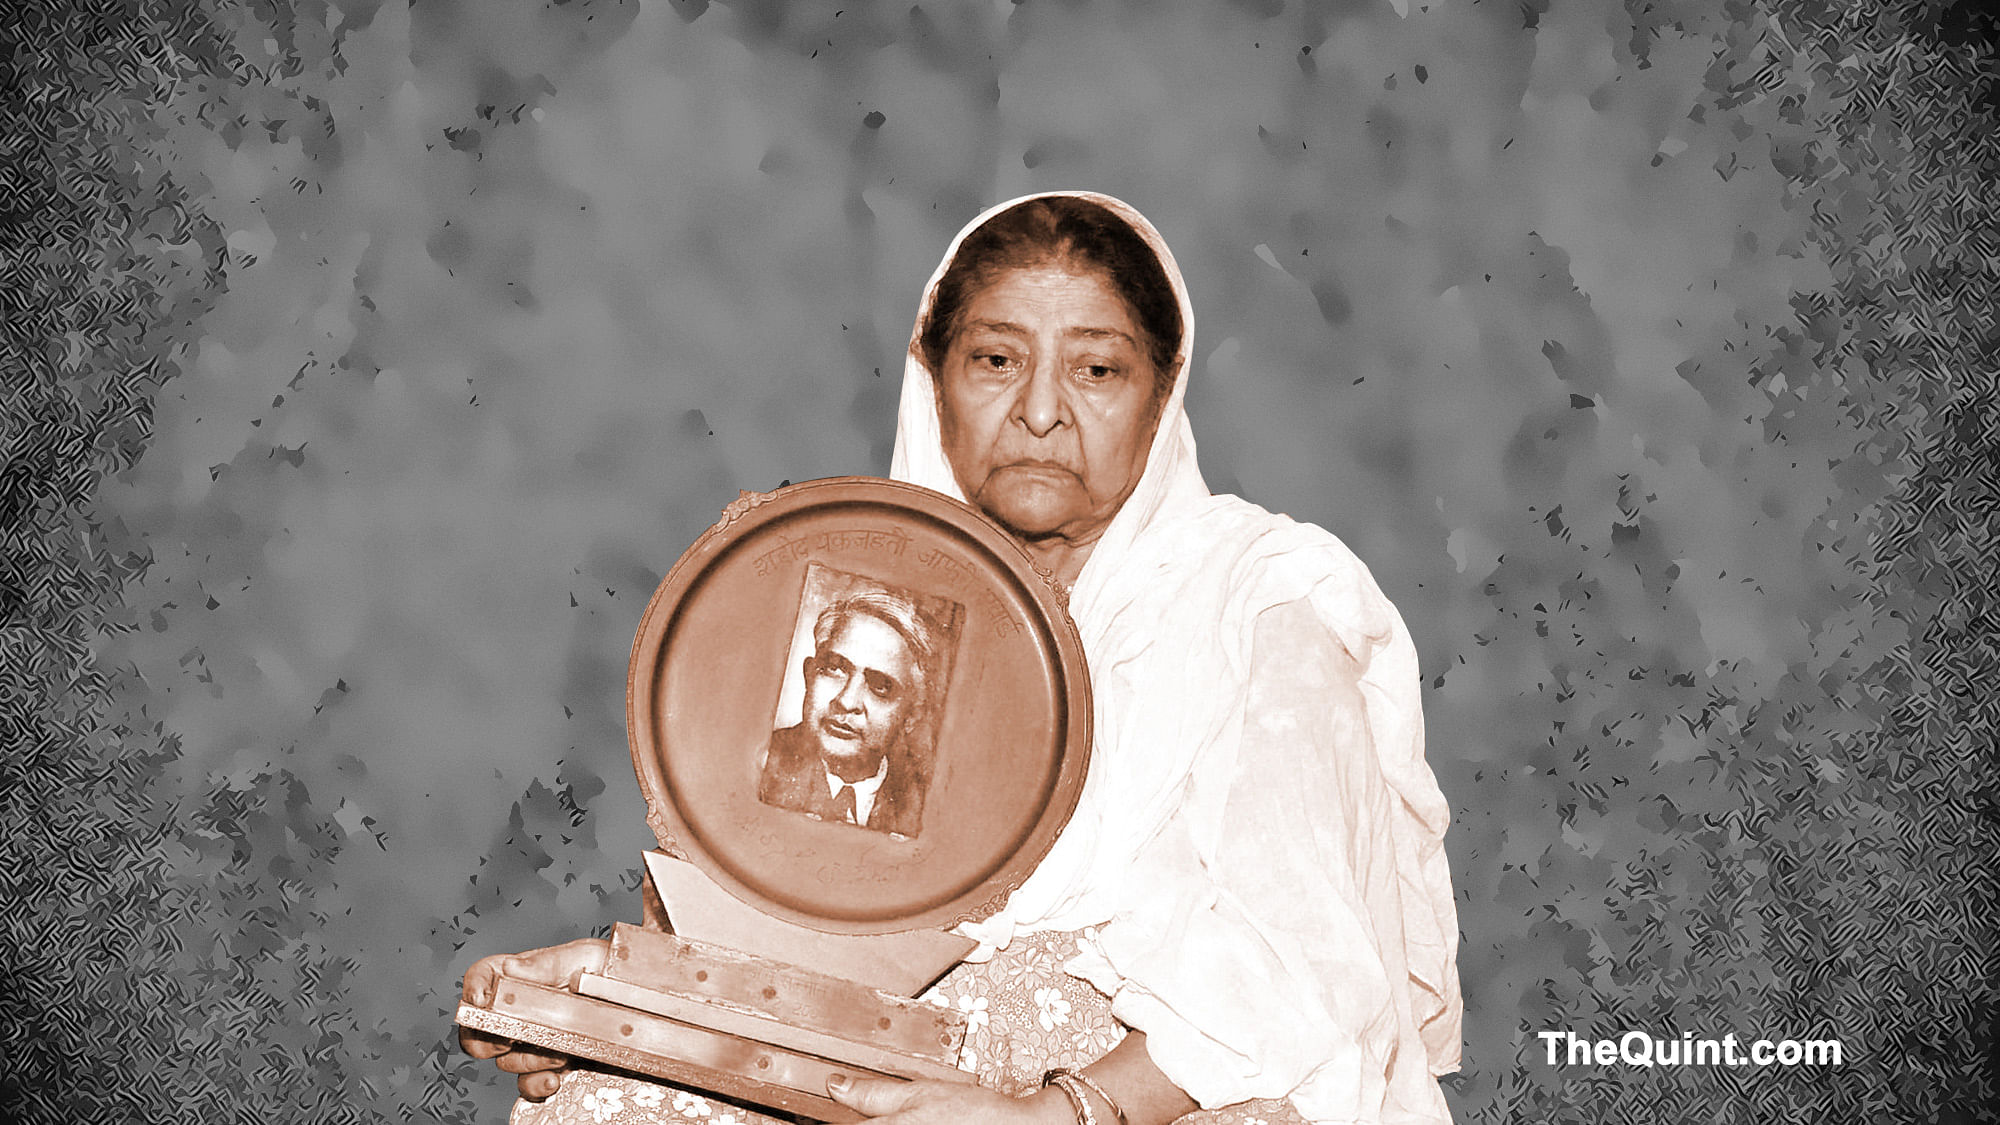 

Zakia Jafri, wife of slain Congress MP Ehsan Jafri, showing her husband’s photo while reacting to the Gulbarg Society verdict, in Surat 2 June 2016. (Photo: PTI/Altered by <b>The Quint</b>)